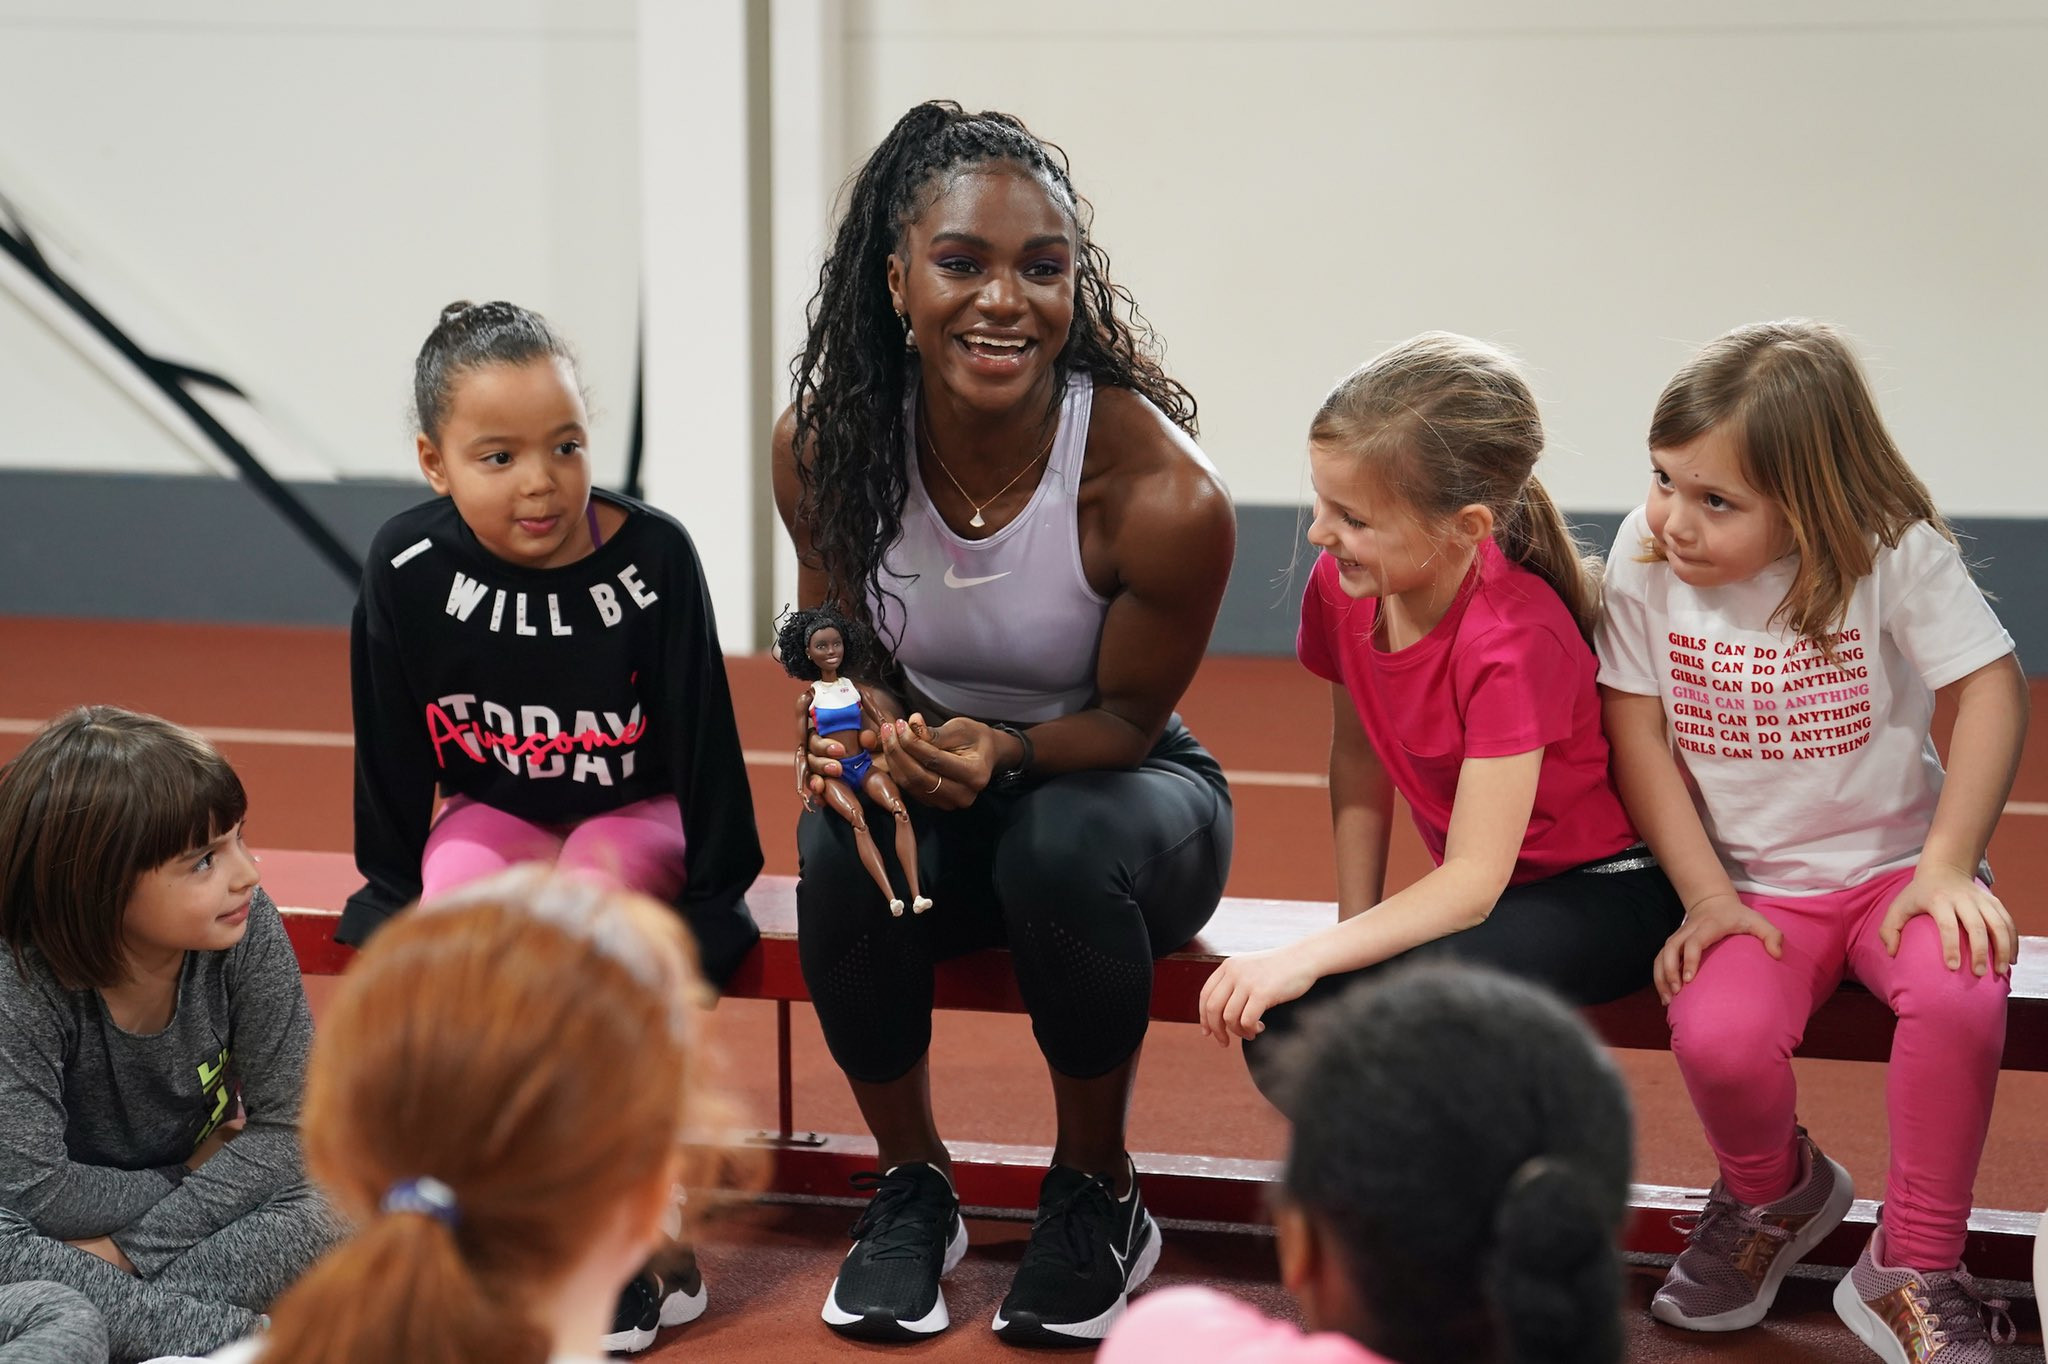 Toy company Mattel made a Barbie doll inspired by sprinter Dina-Asher Smith ©Getty Images